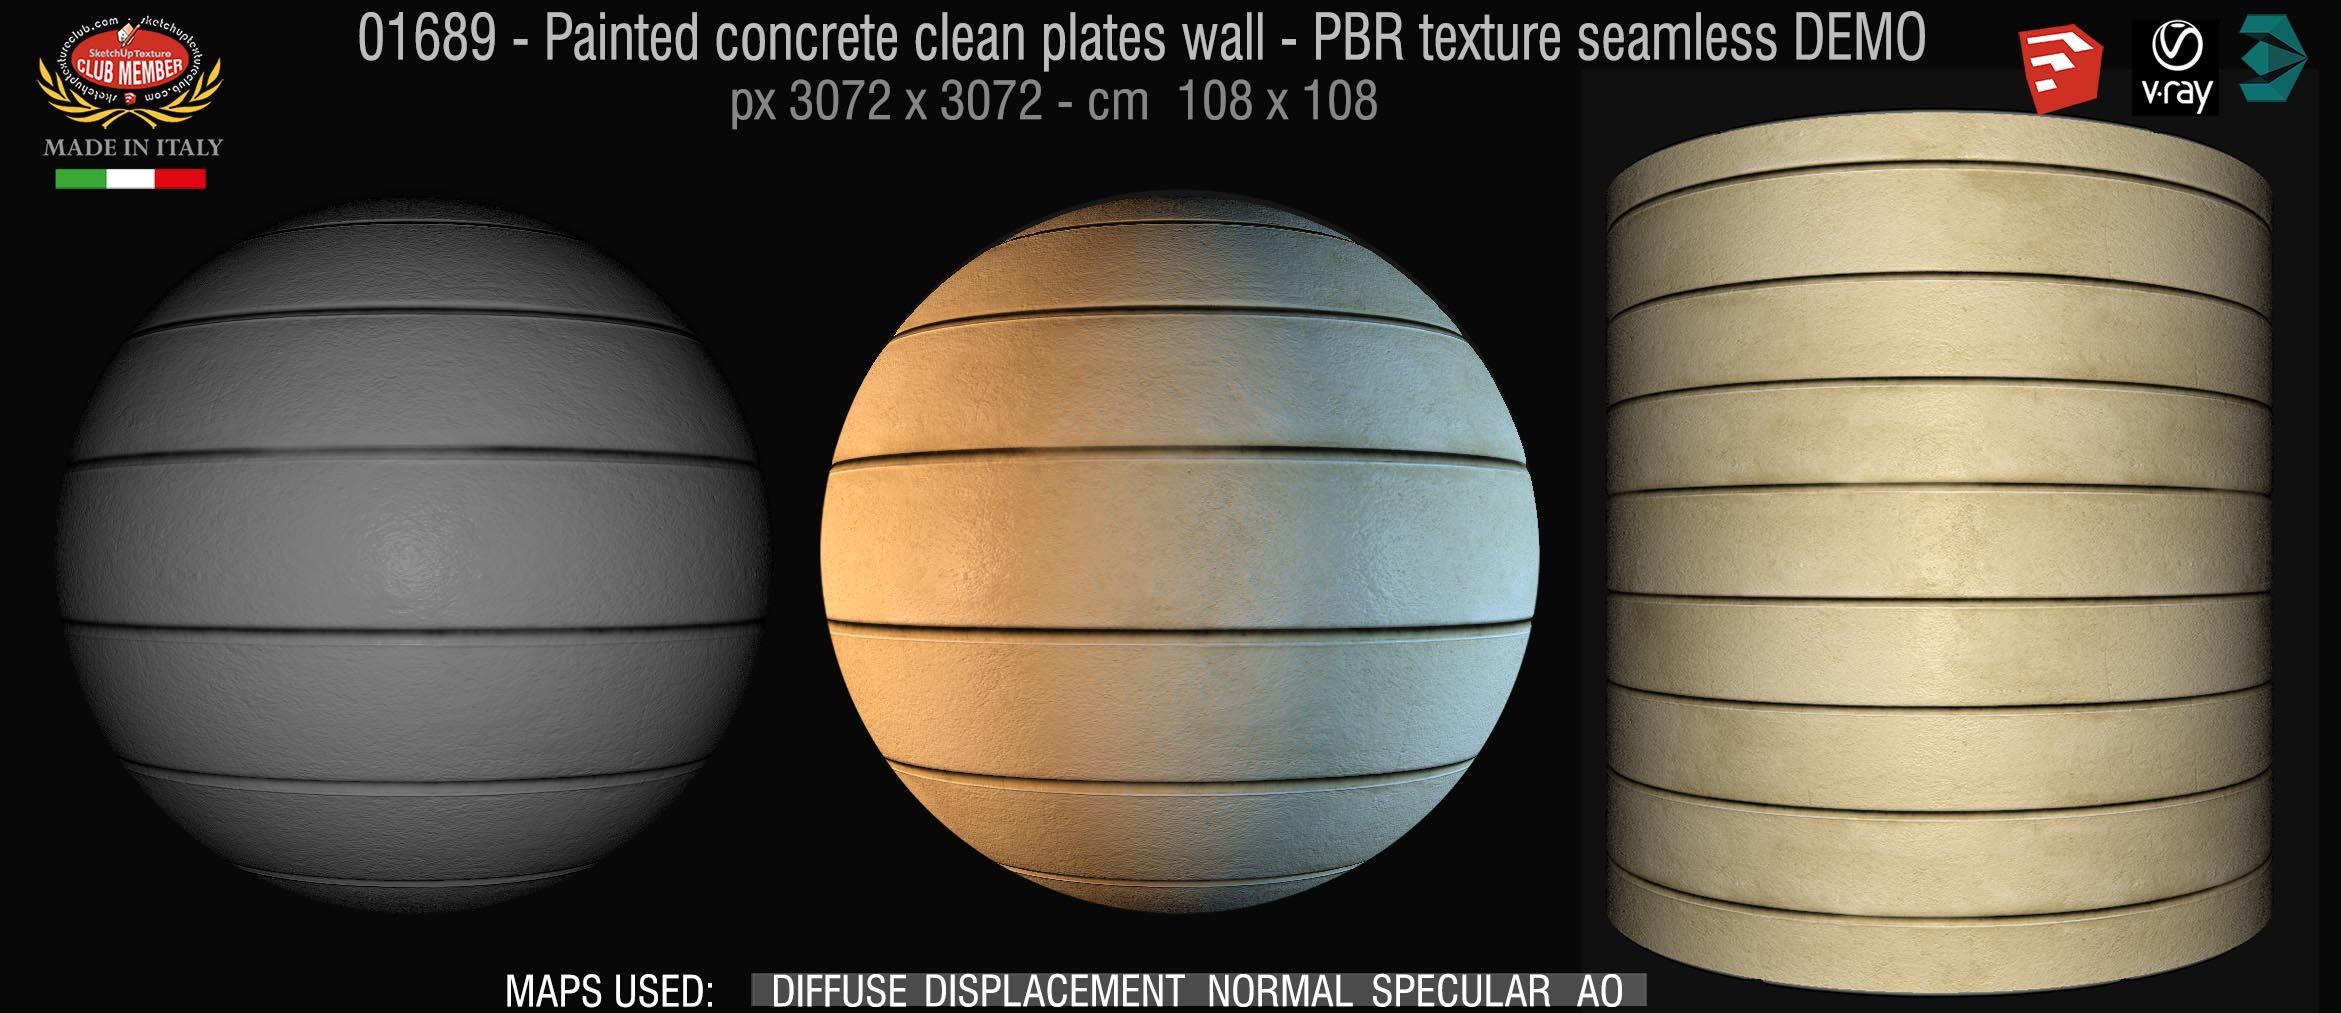 01689 Painted concrete clean plates wall PBR texture seamless DEMO